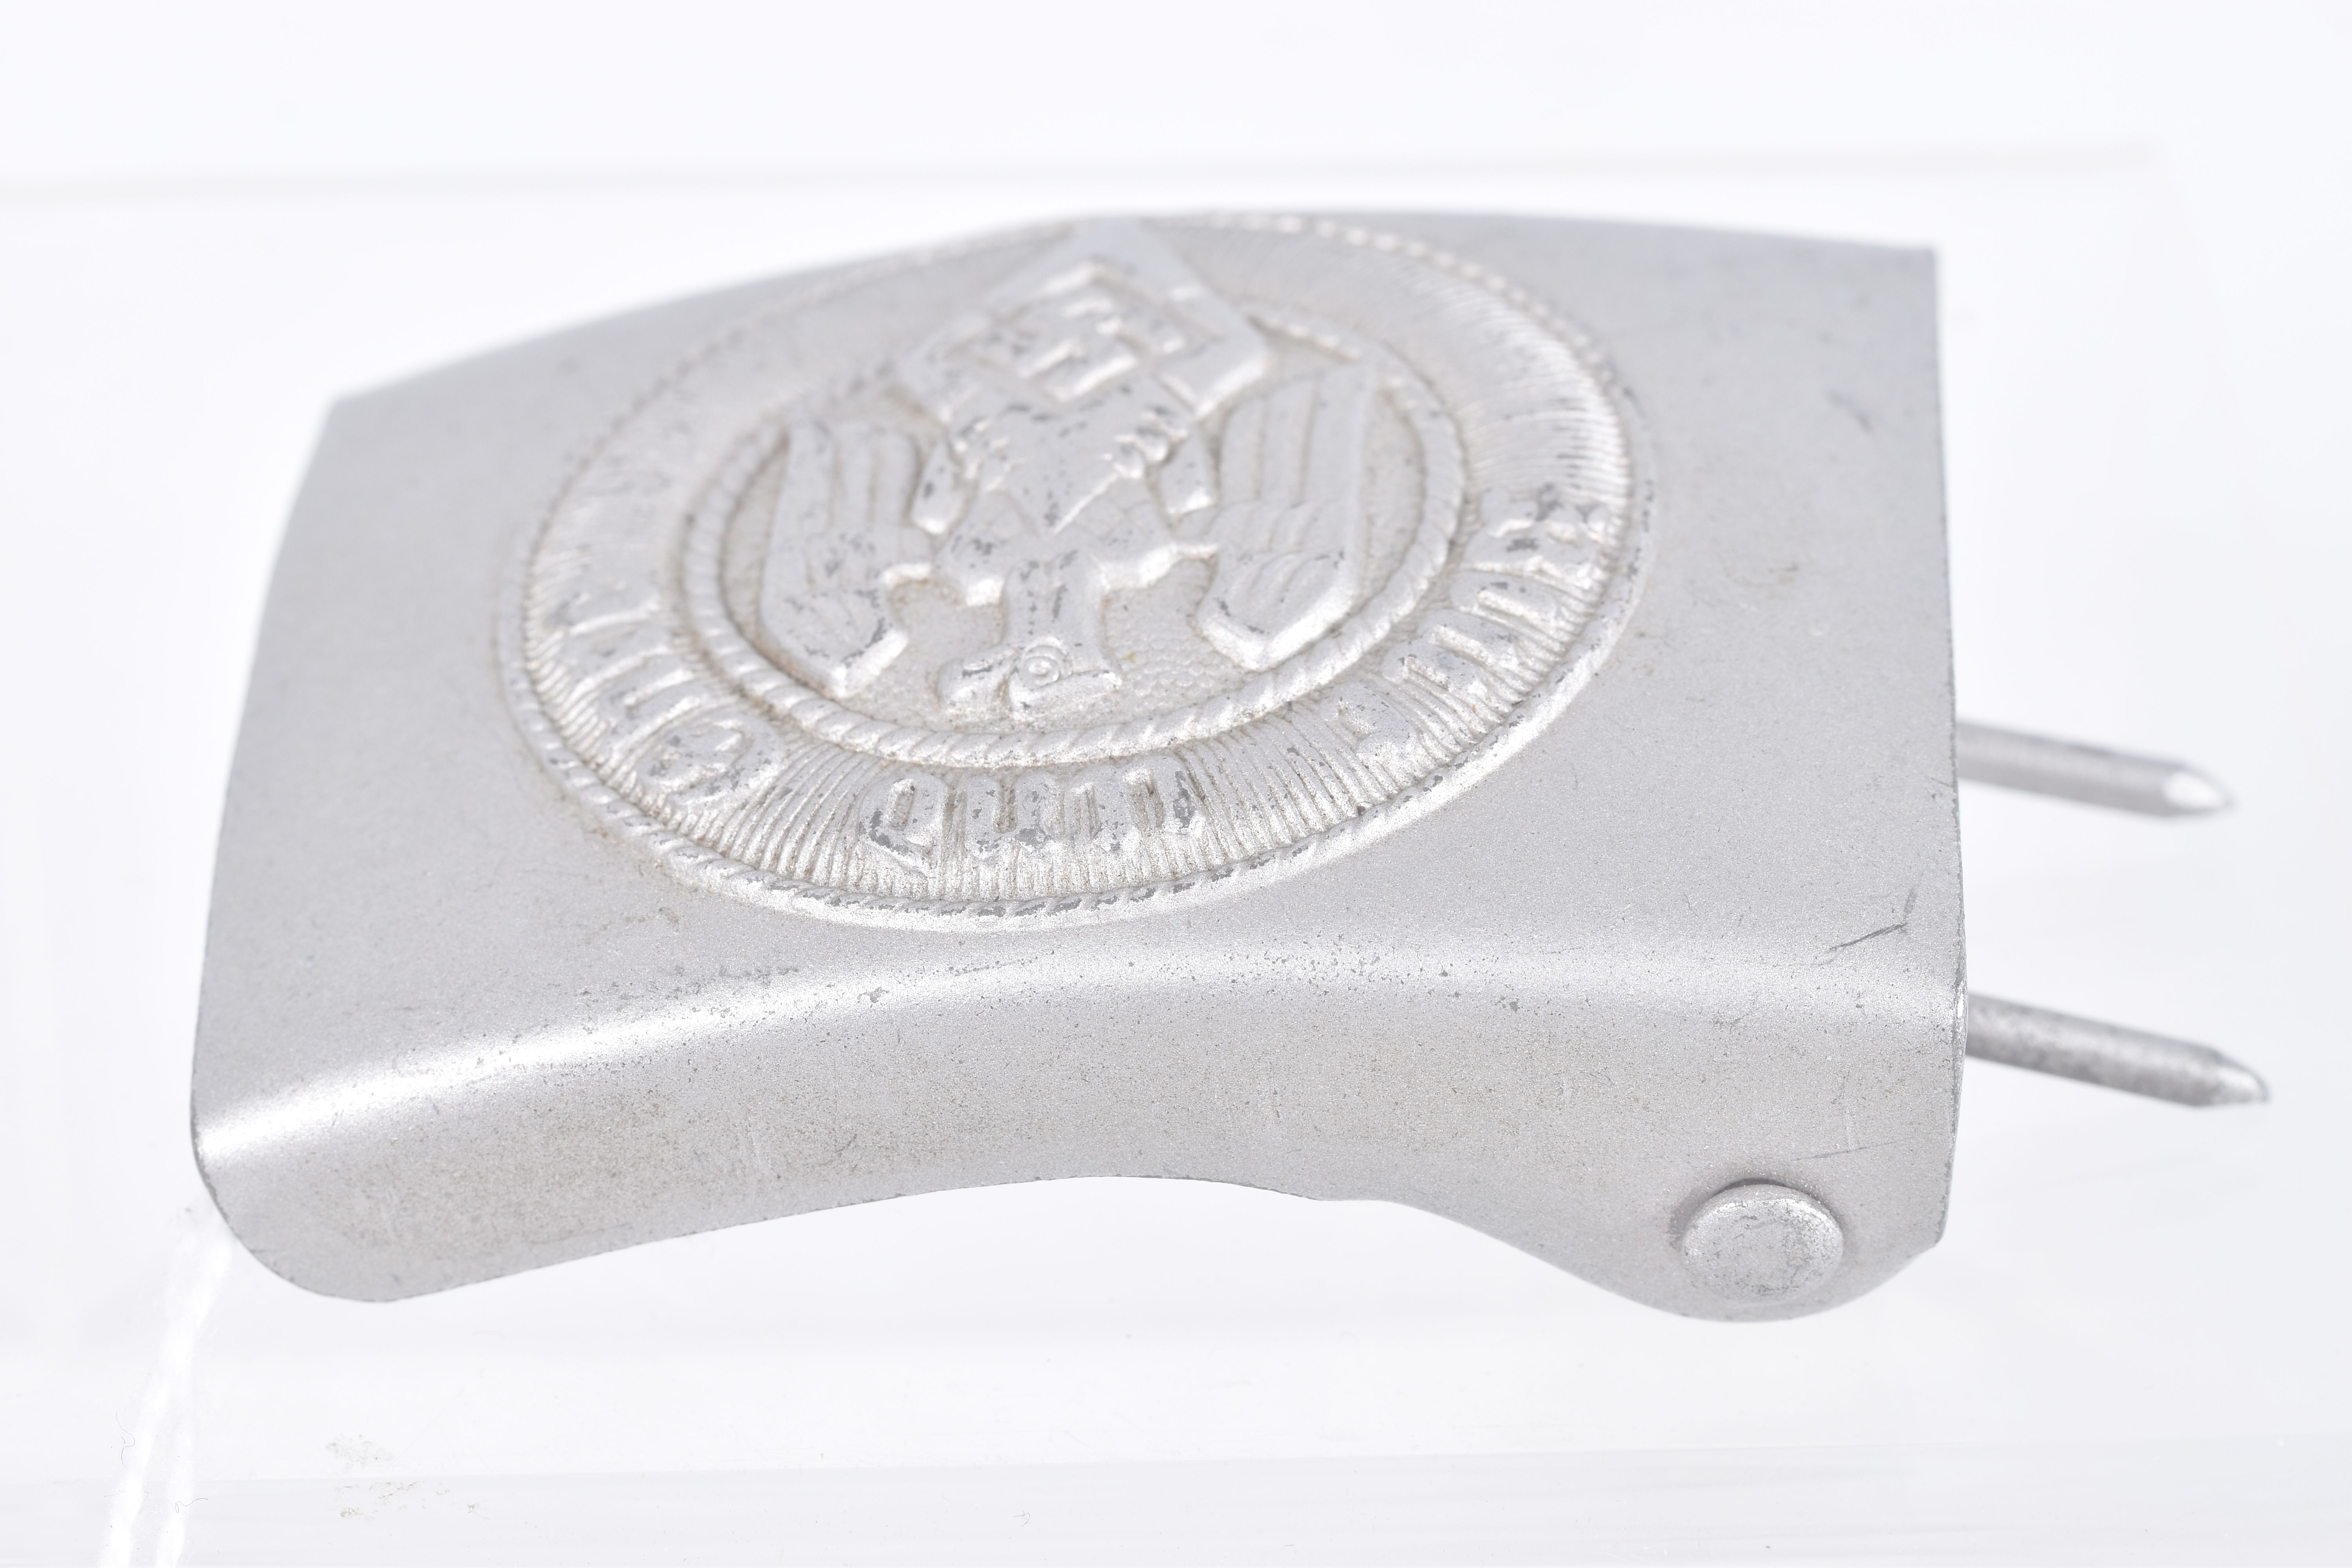 A THIRD REICH GERMAN YOUTH BELT BUCKLE, the front features a closed winged eagle - Image 5 of 8